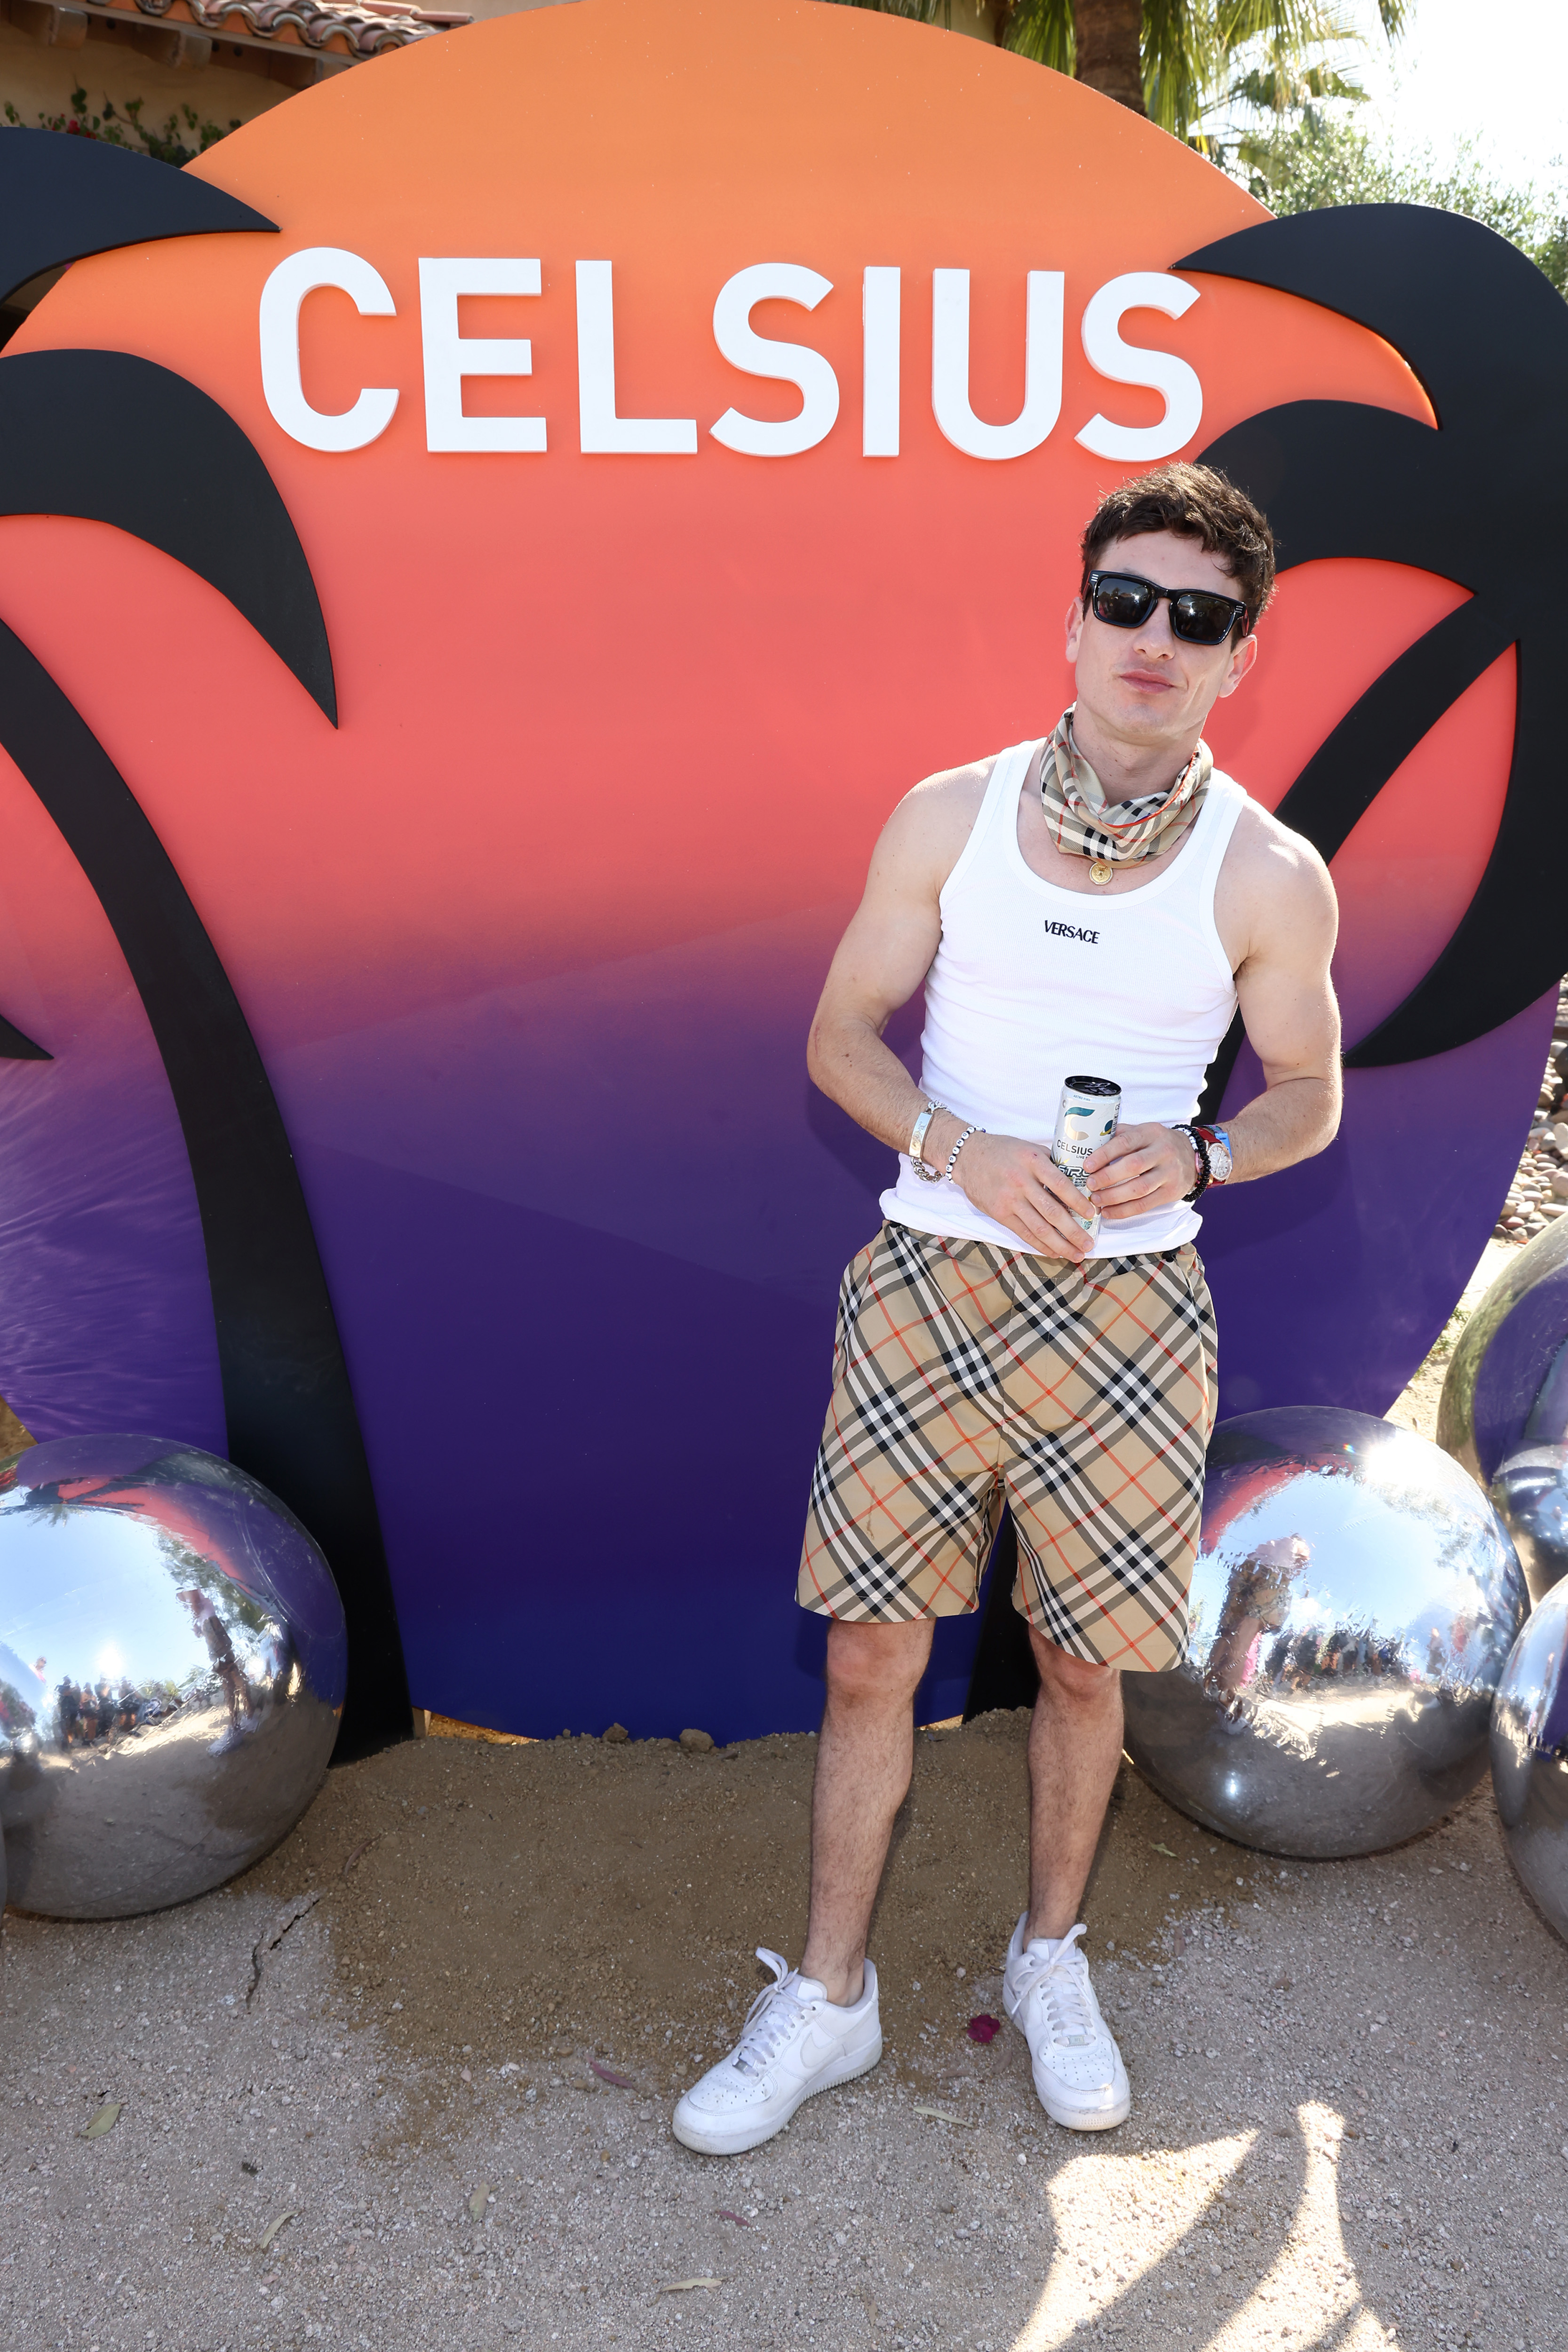 Man in white tank top and plaid shorts standing in front of a Celsius banner with silver spheres nearby